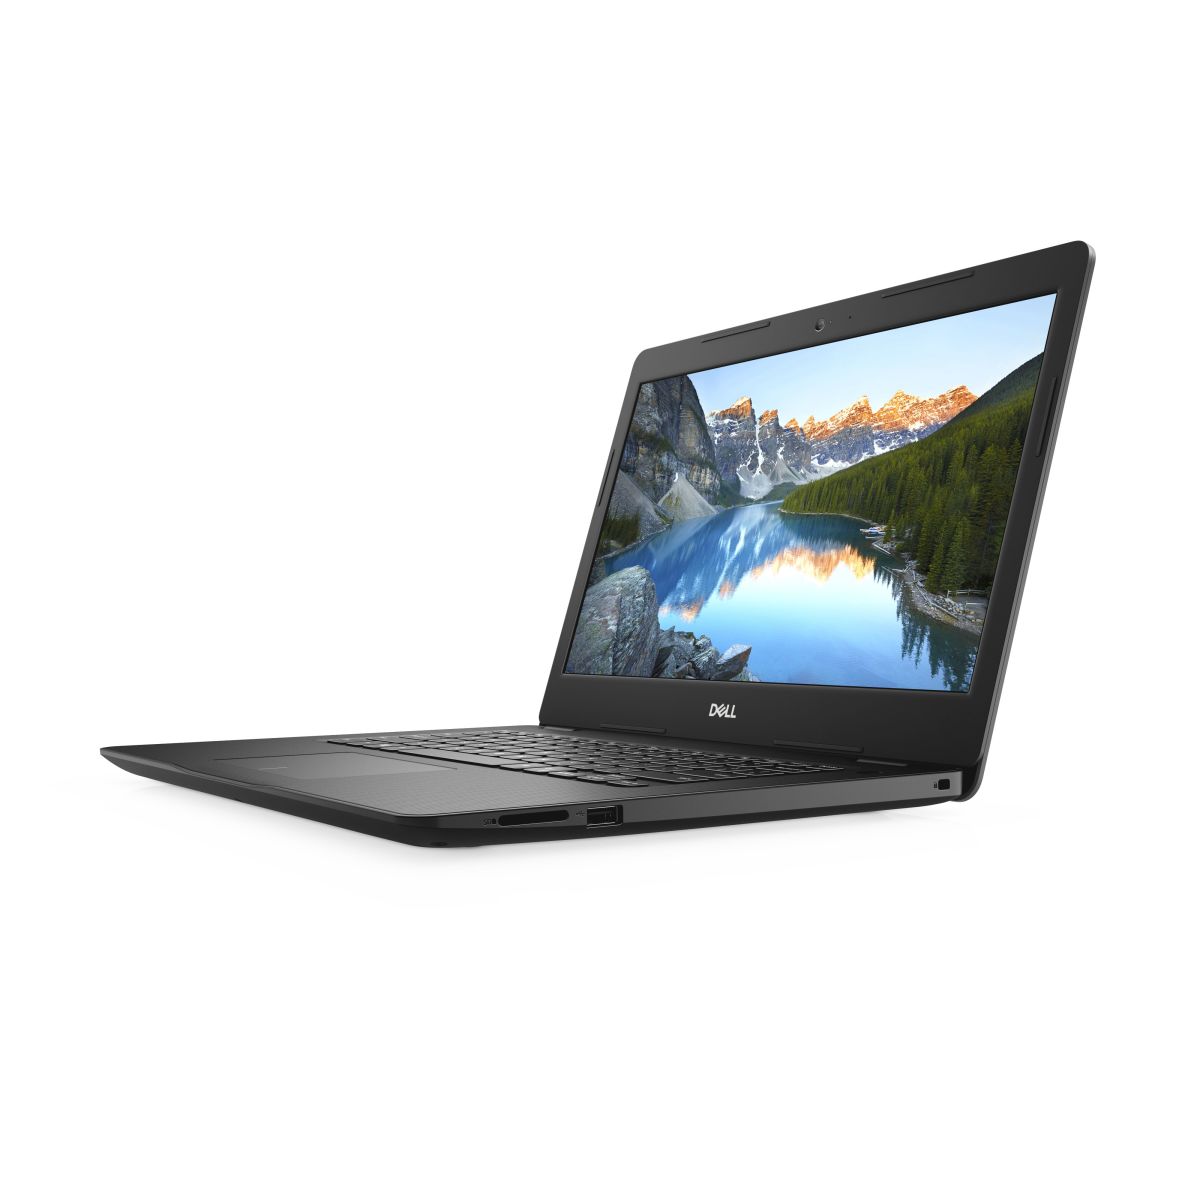 Download Drivers Of Dell Inspiron 15 3000 Series